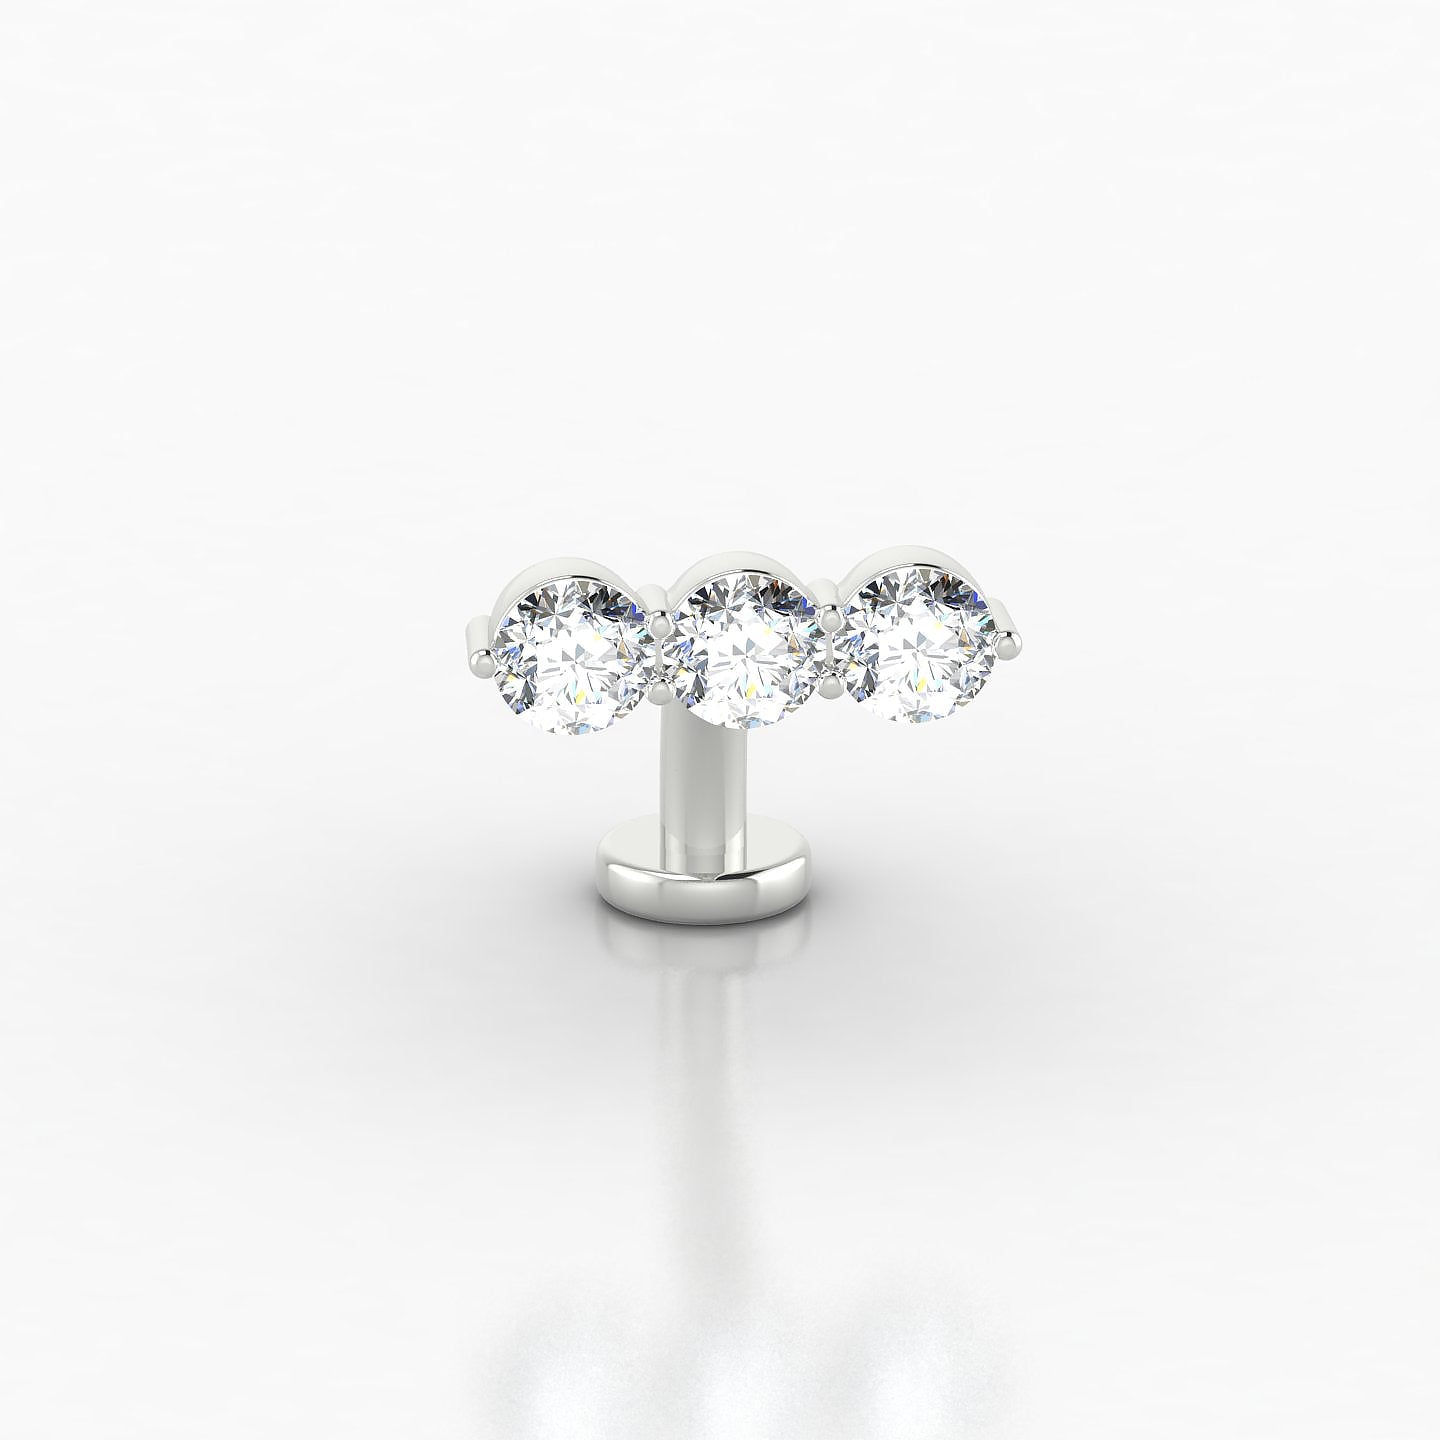 Ma'at | 18k White Gold 10 mm 10 mm Trilogy Diamond Floating Navel Piercing